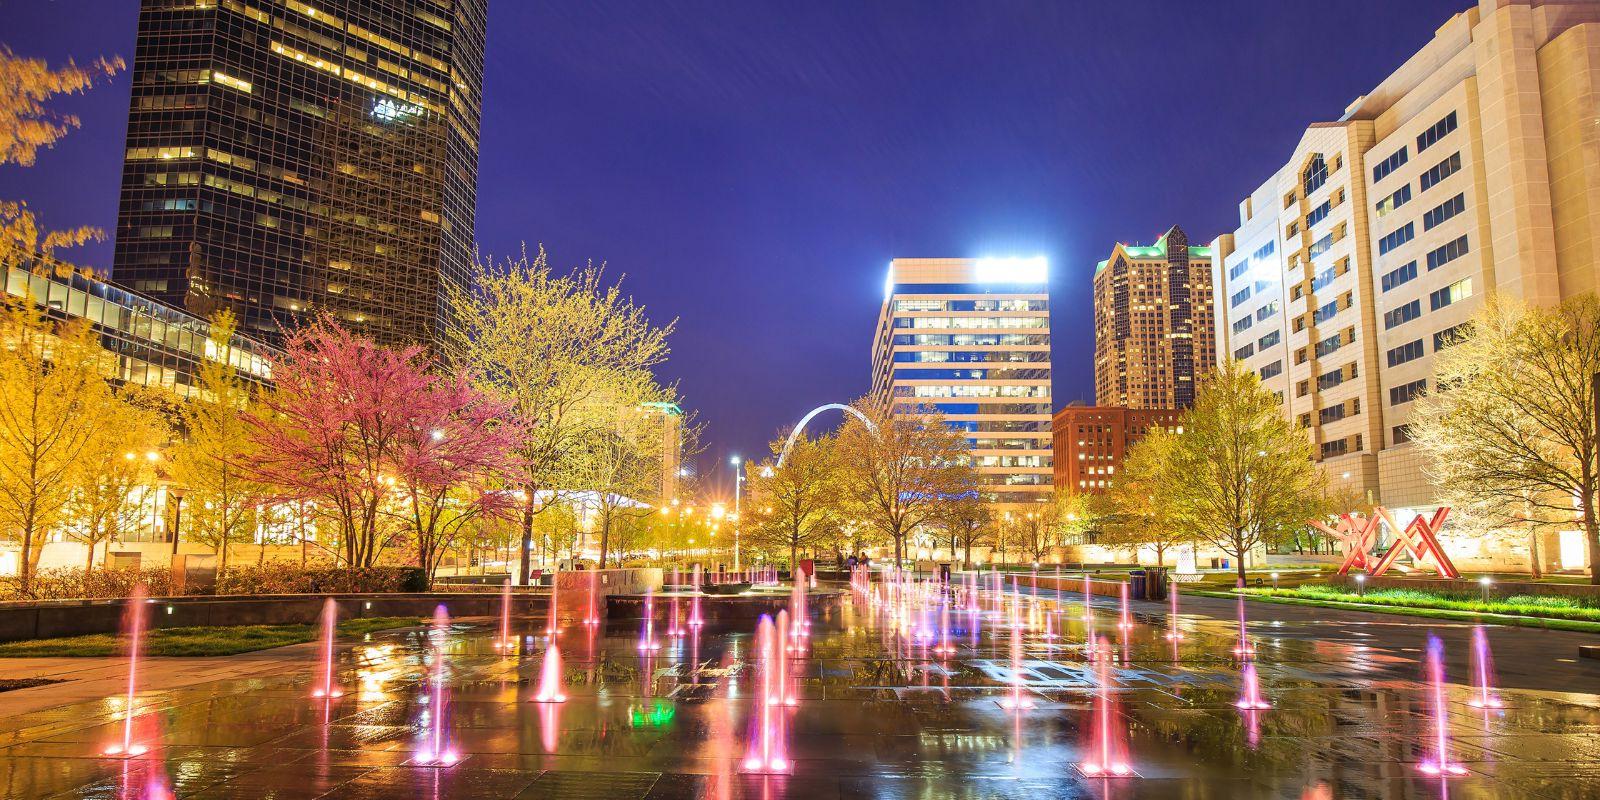 Citygarden lights up St. Louis' downtown core at night.